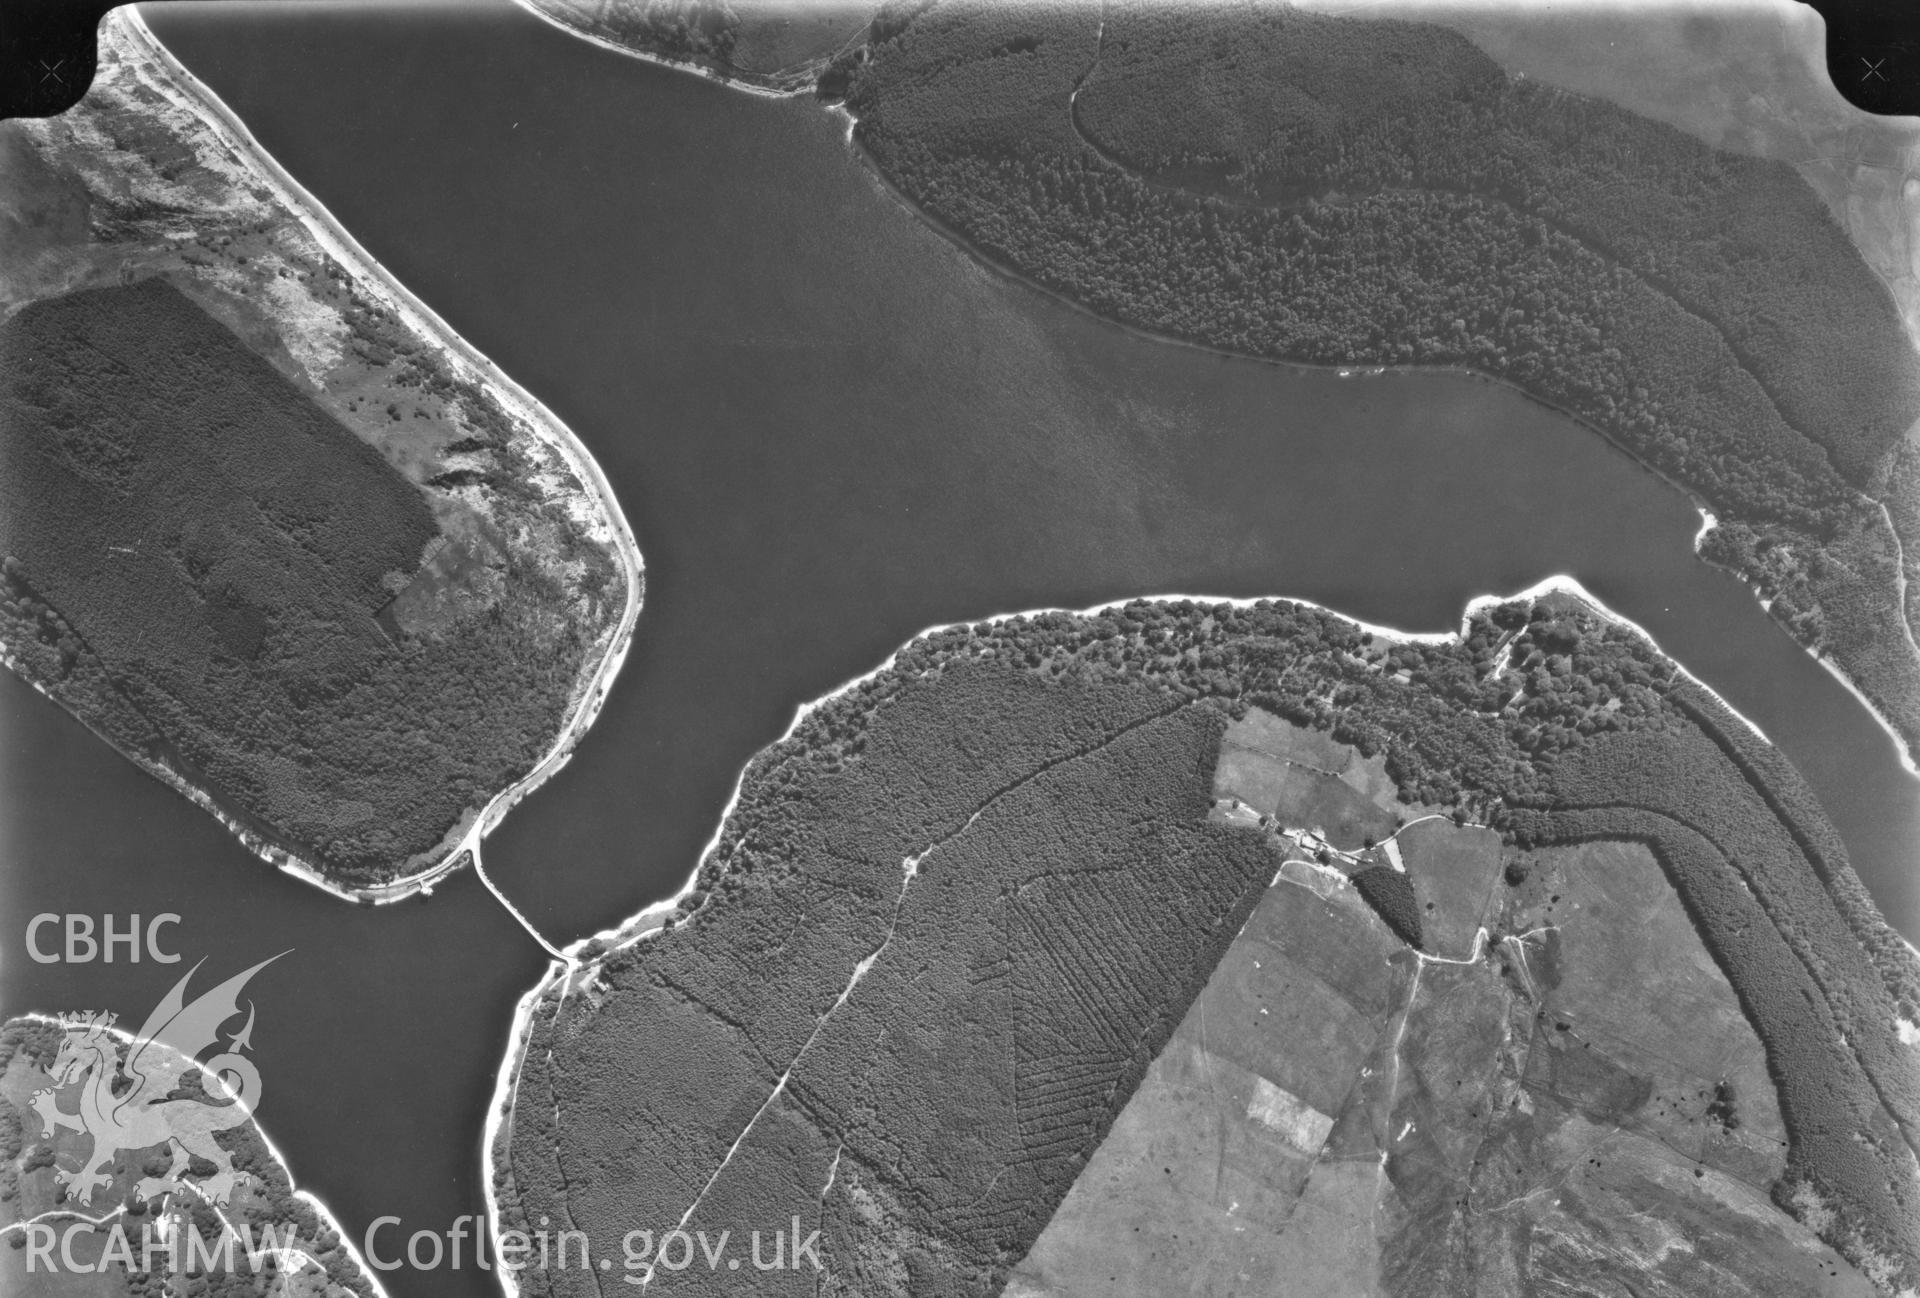 Aerial photograph of the Elan Valley, dated 1987. Included in material relating to Archaeological Desk Based Assessment of Afon Claerwen, Elan Valley, Rhayader, Powys. Assessment conducted by Archaeology Wales in 2018. Report no. 1681. Project no. 2573.